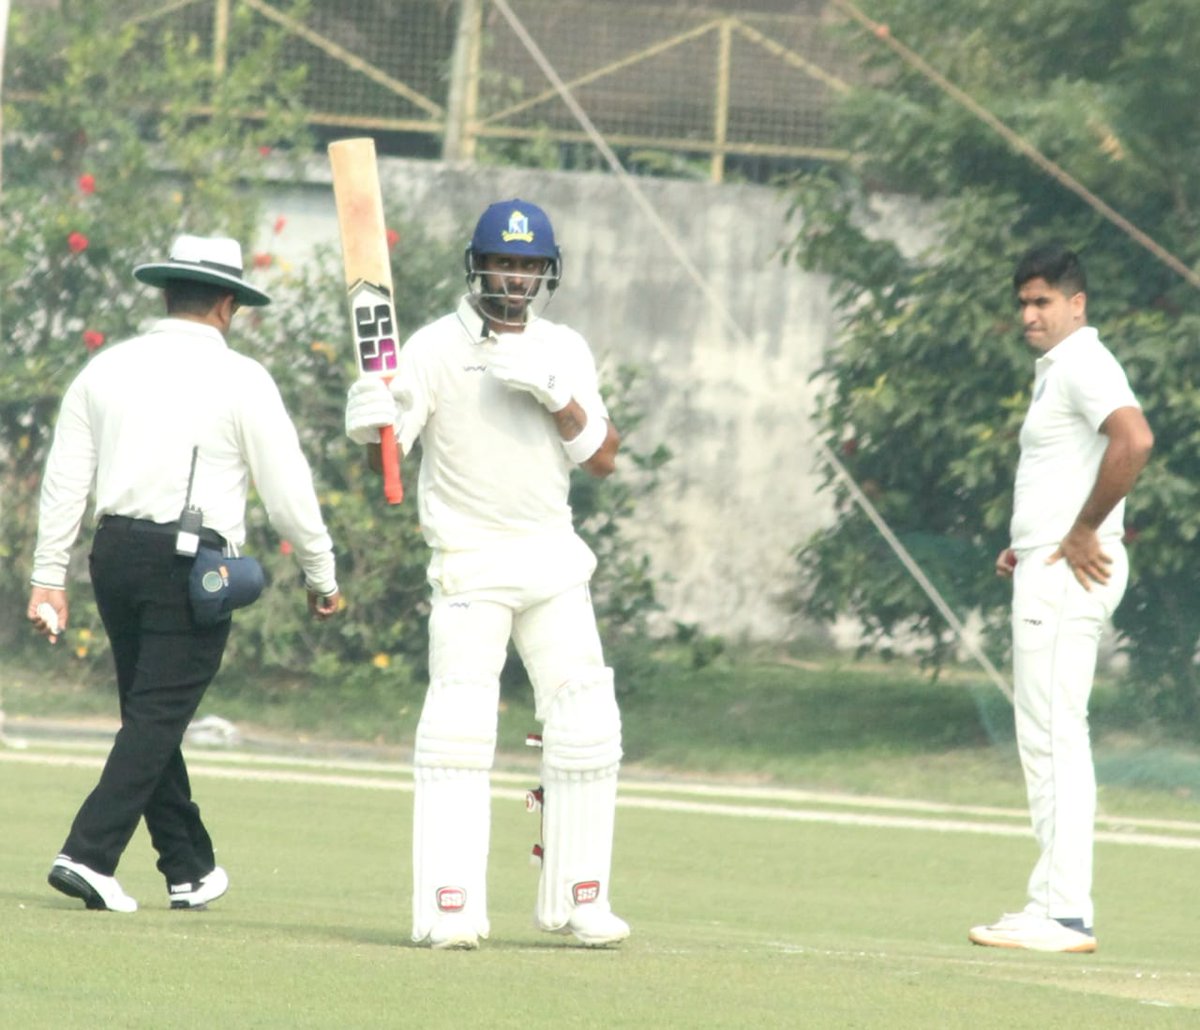 Ranji Trophy 2019-20 | Elite Group A - Bengal headline Group A with win over Punjab to qualify for quarter-finals